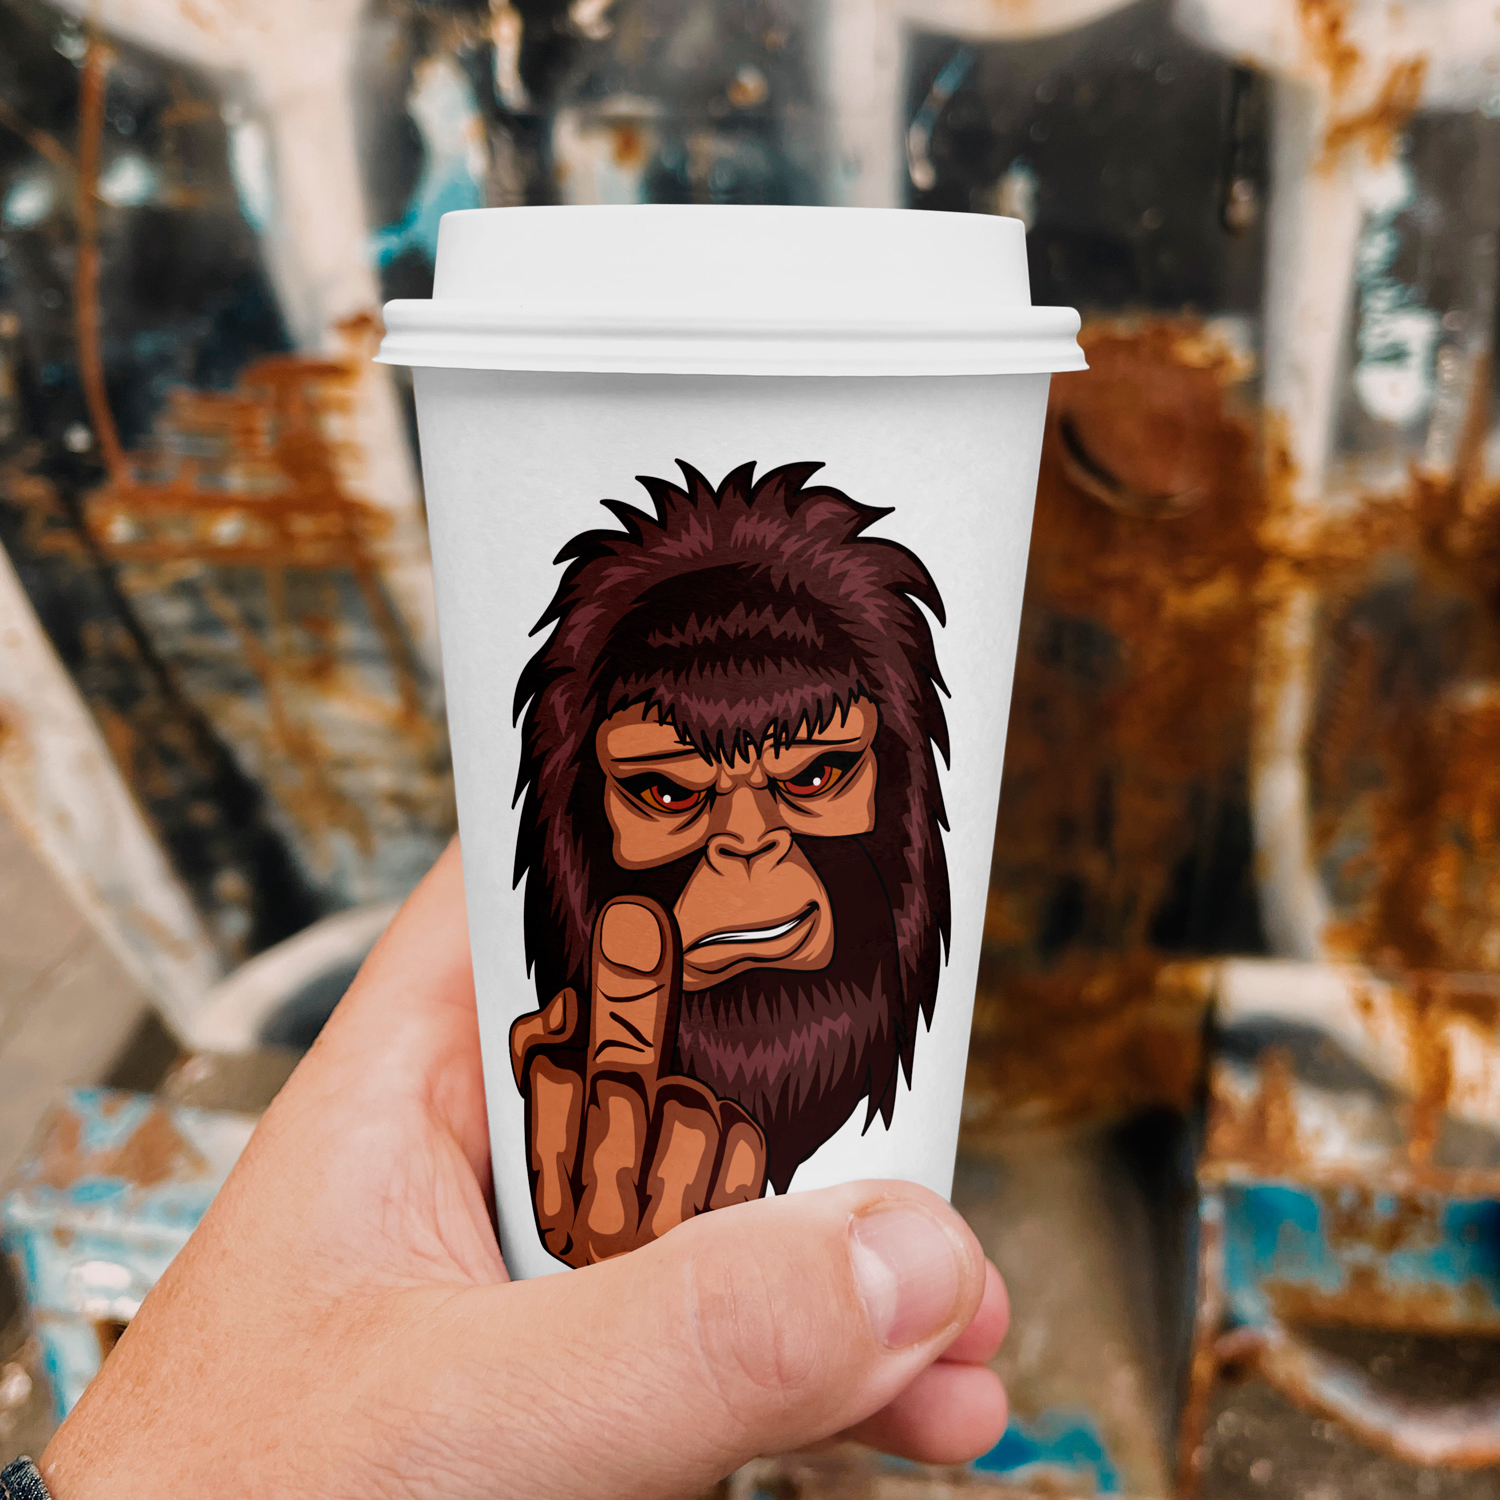 Hand holding a coffee cup with a picture of a gorilla on it.